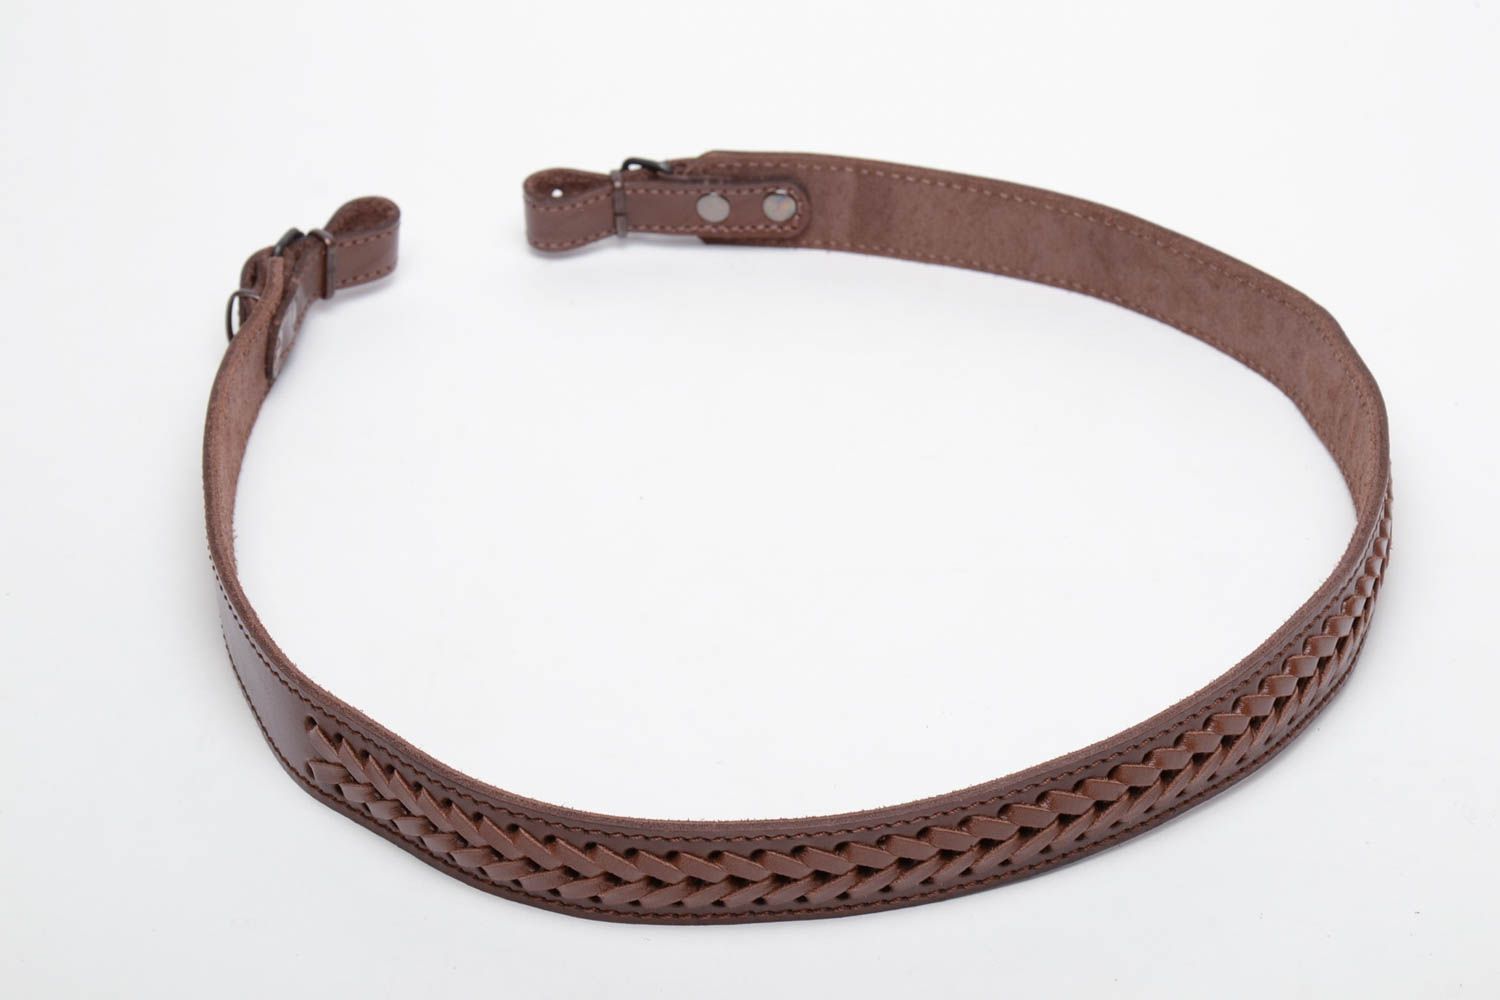 Woven leather rifle sling photo 3